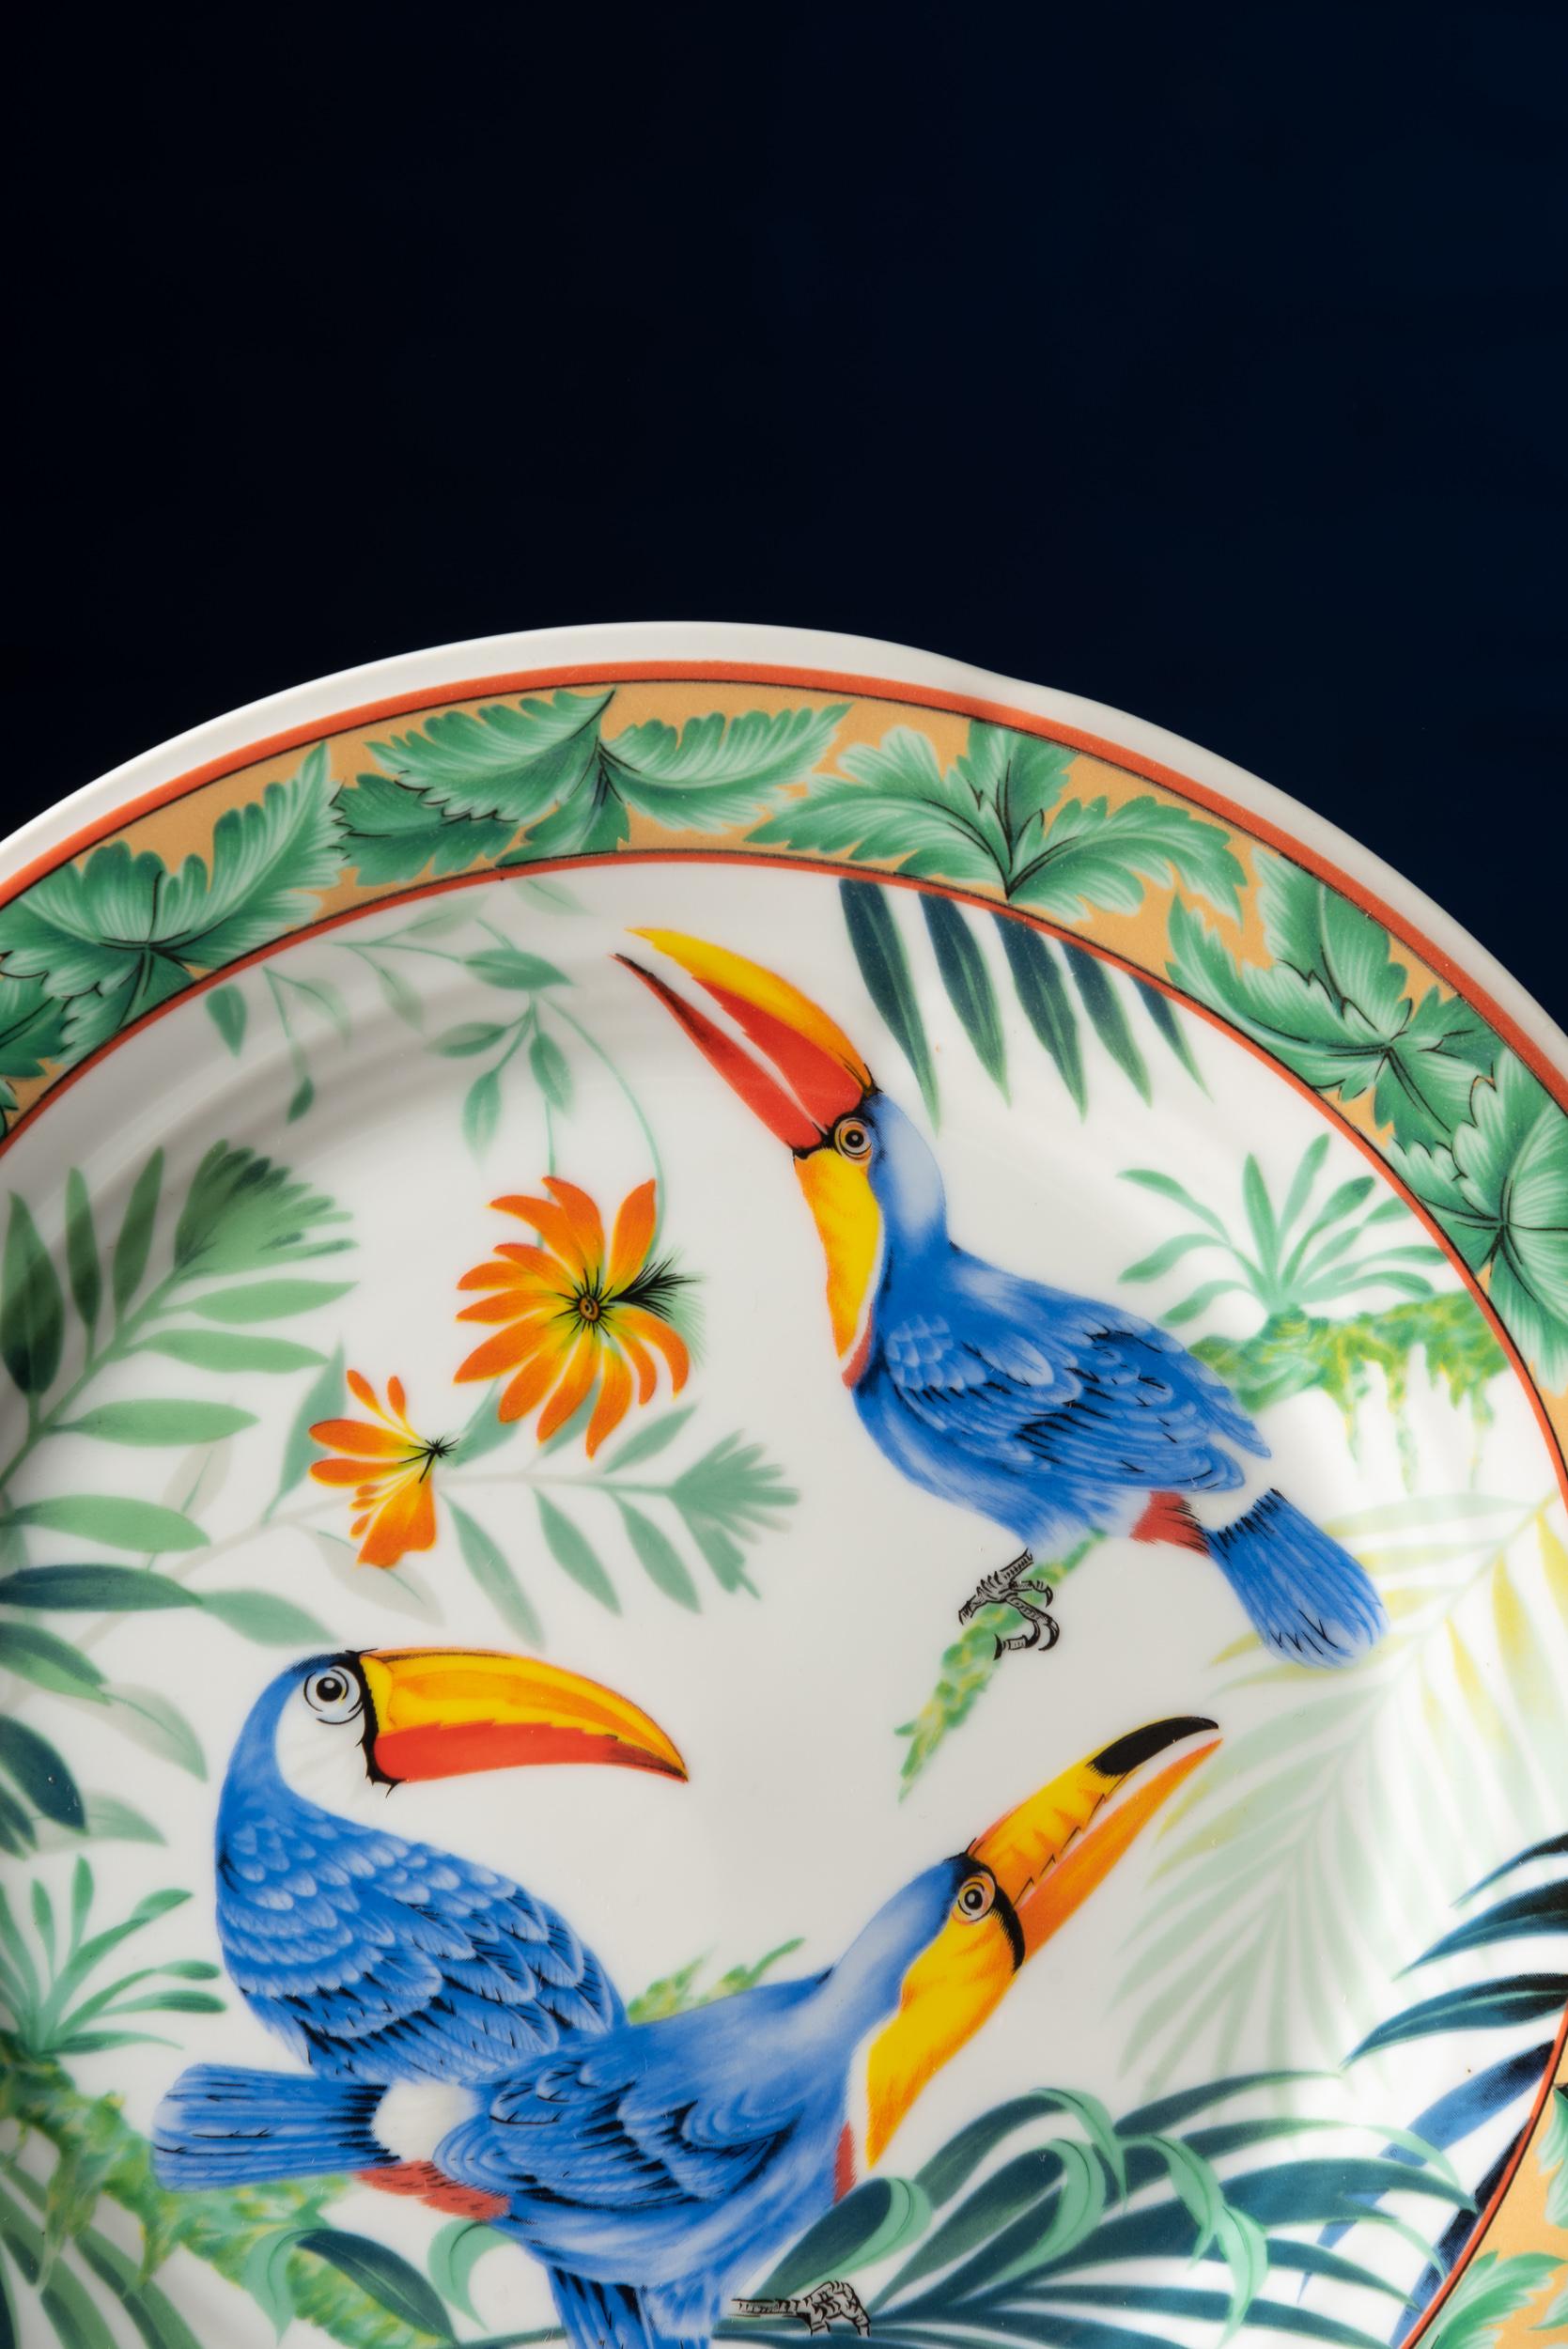 Japanese Beautiful Plate Made in Japan with Two Tropical Birds in a Forest